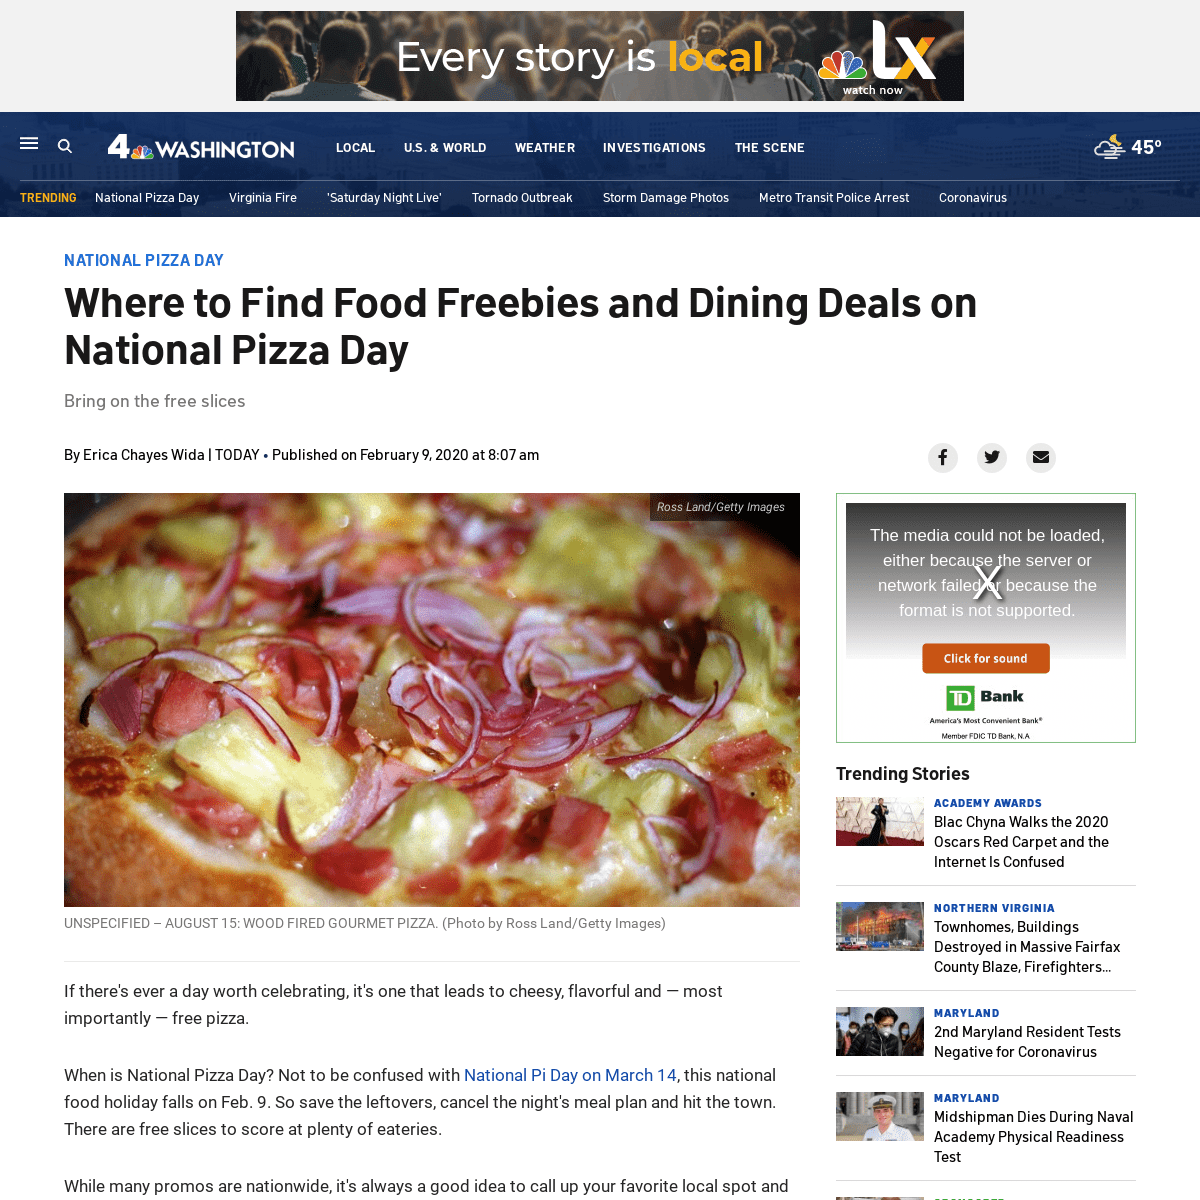 A complete backup of www.nbcwashington.com/news/national-international/find-food-freebies-dining-deals-national-pizza-day/221323